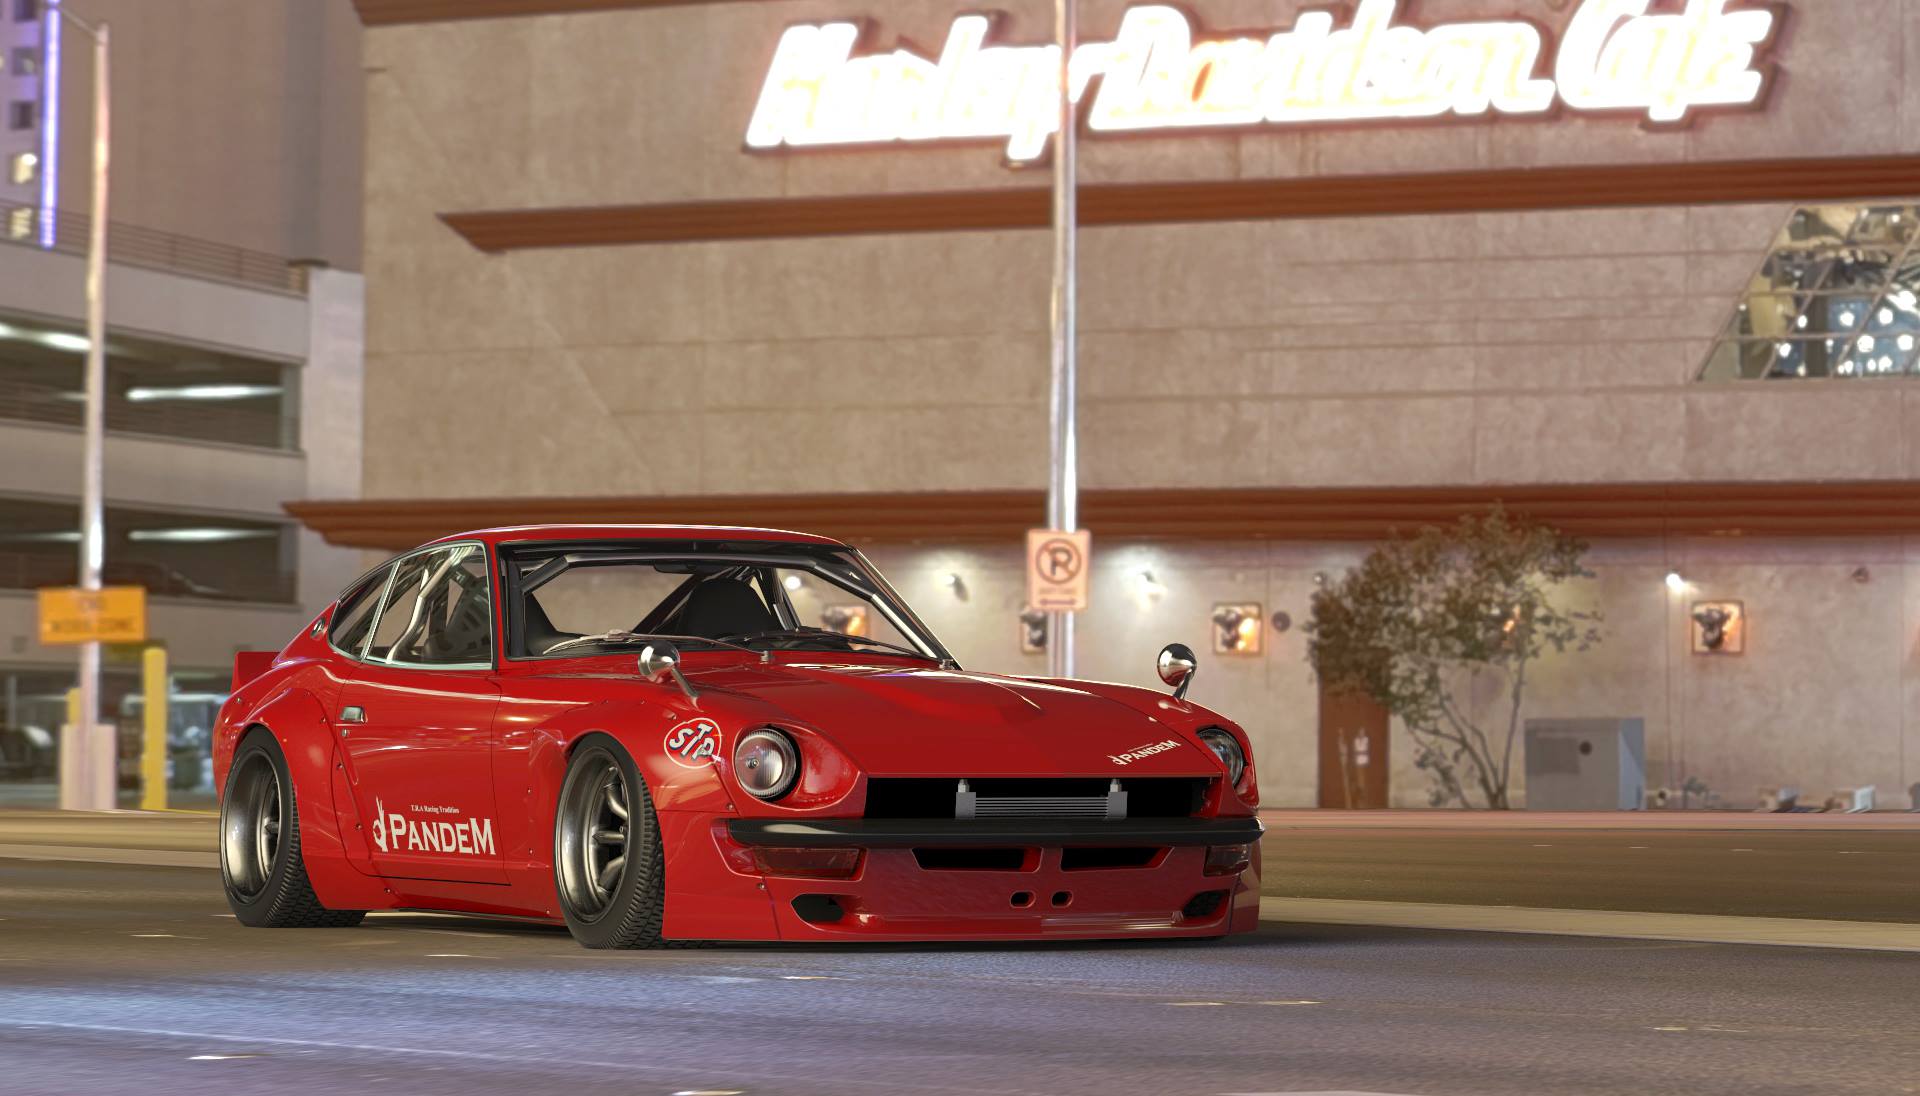 Rocket Bunny has released a new kit for the S30 Z. The Pandem kit ...